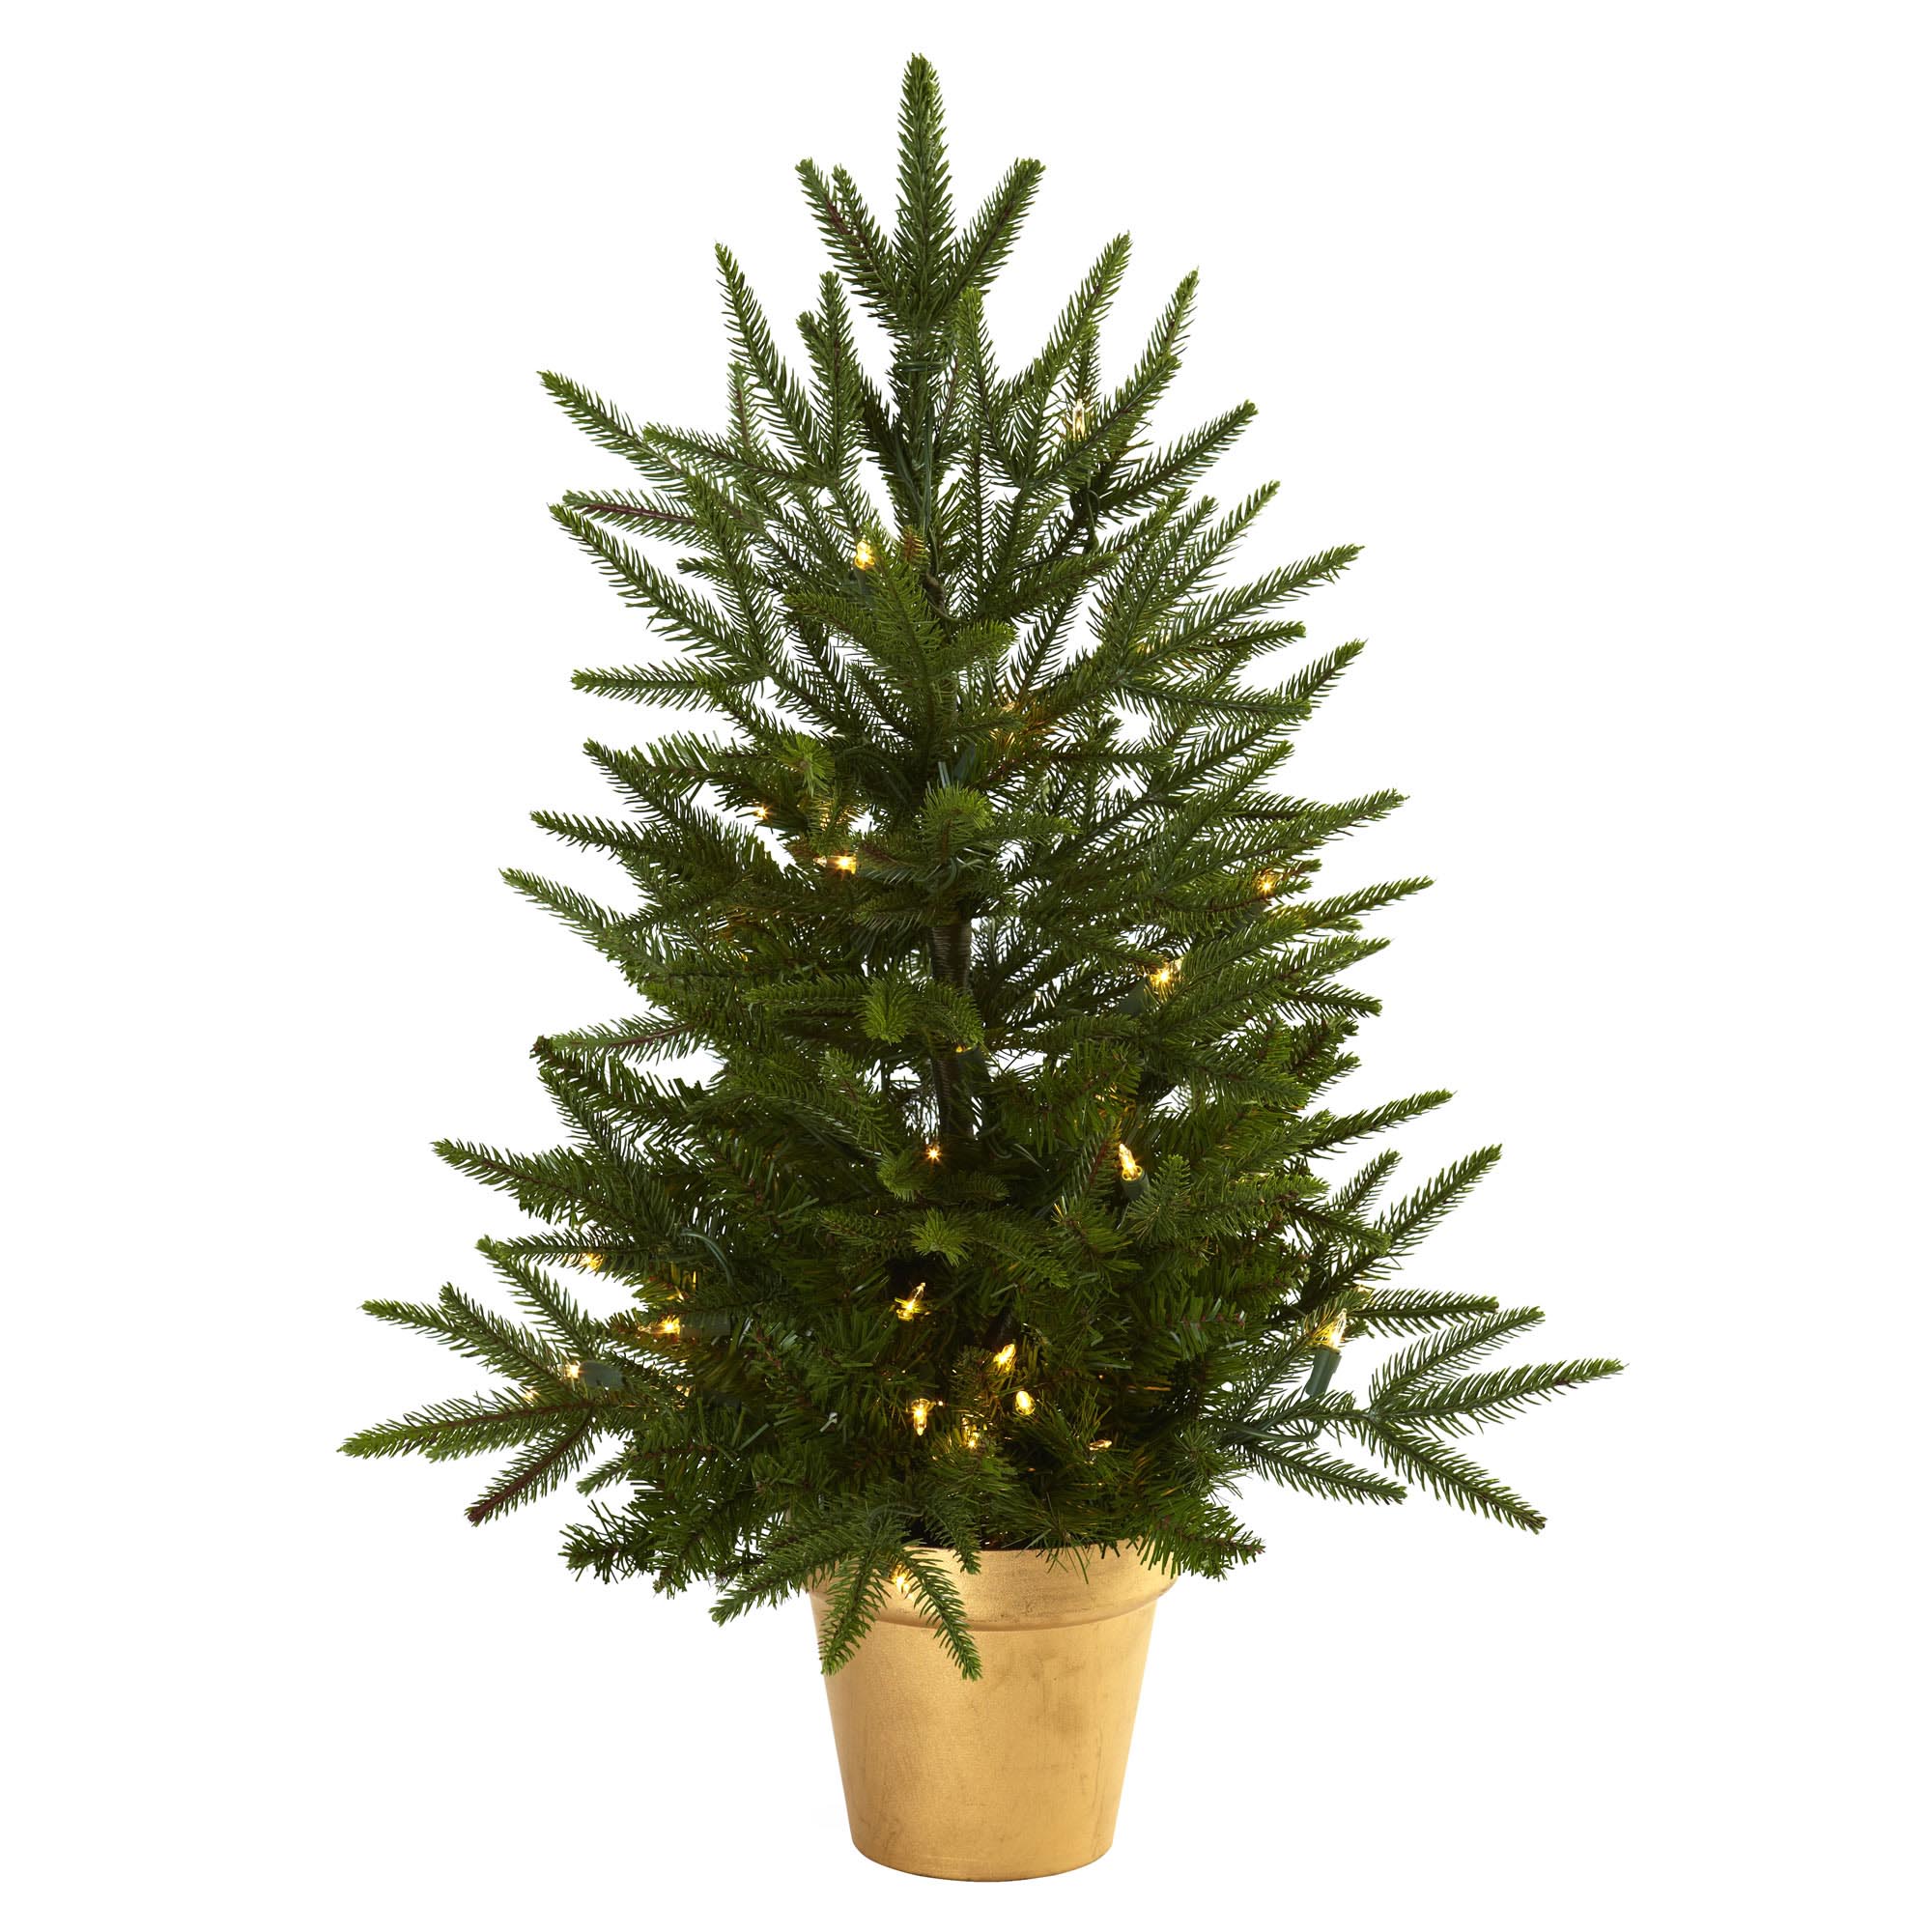 2.5 Foot Artificial Christmas Tree In Golden Planter: Clear Lights